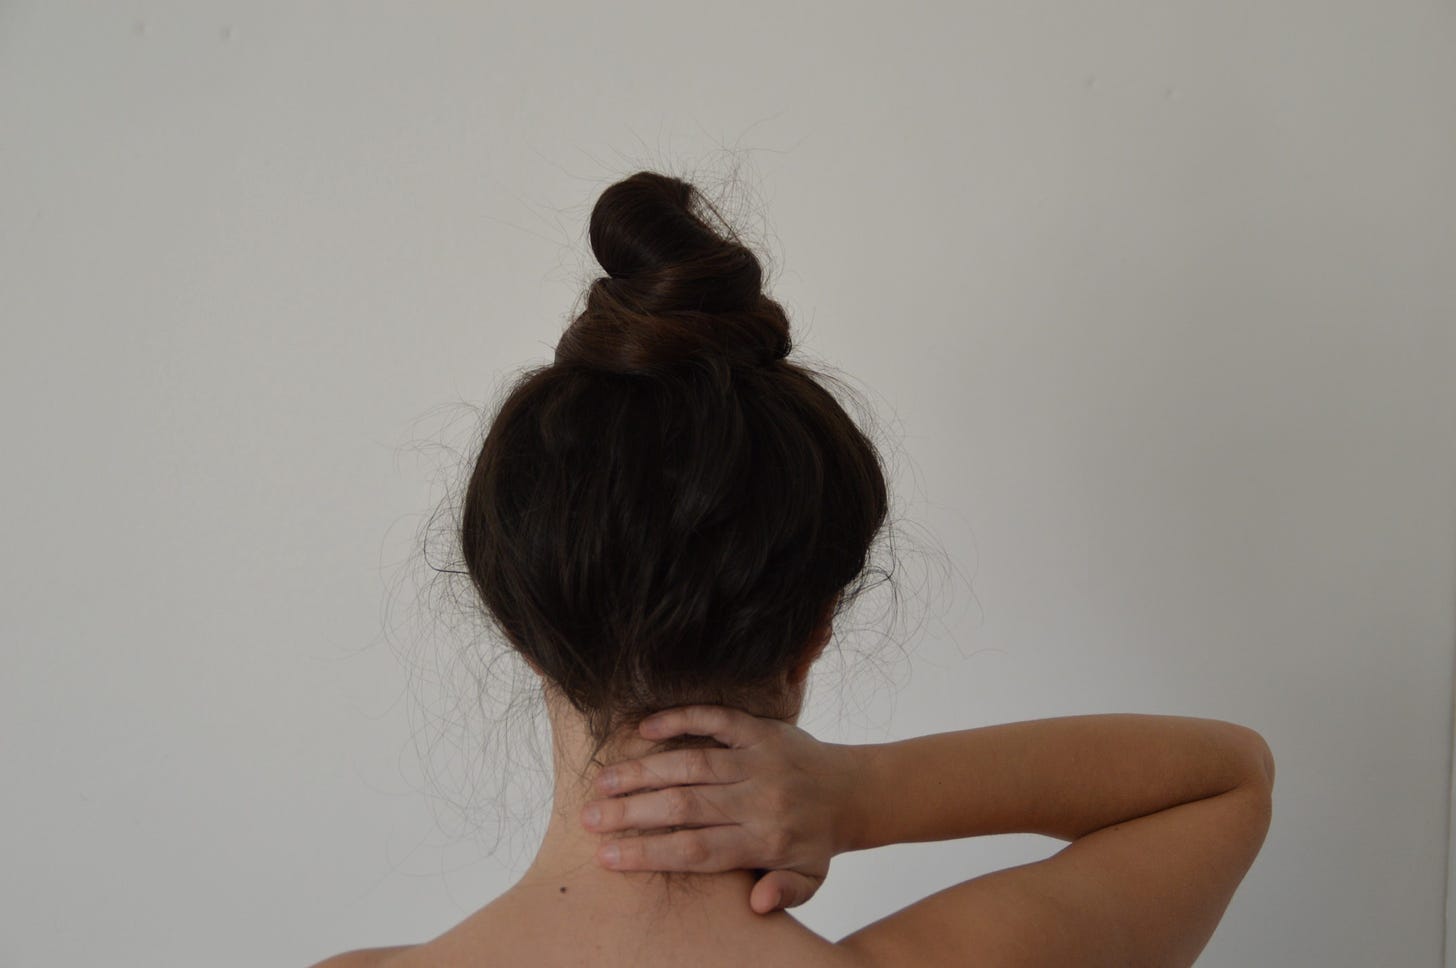 A woman with dark hair rubs her neck as she turns her back to the camera.